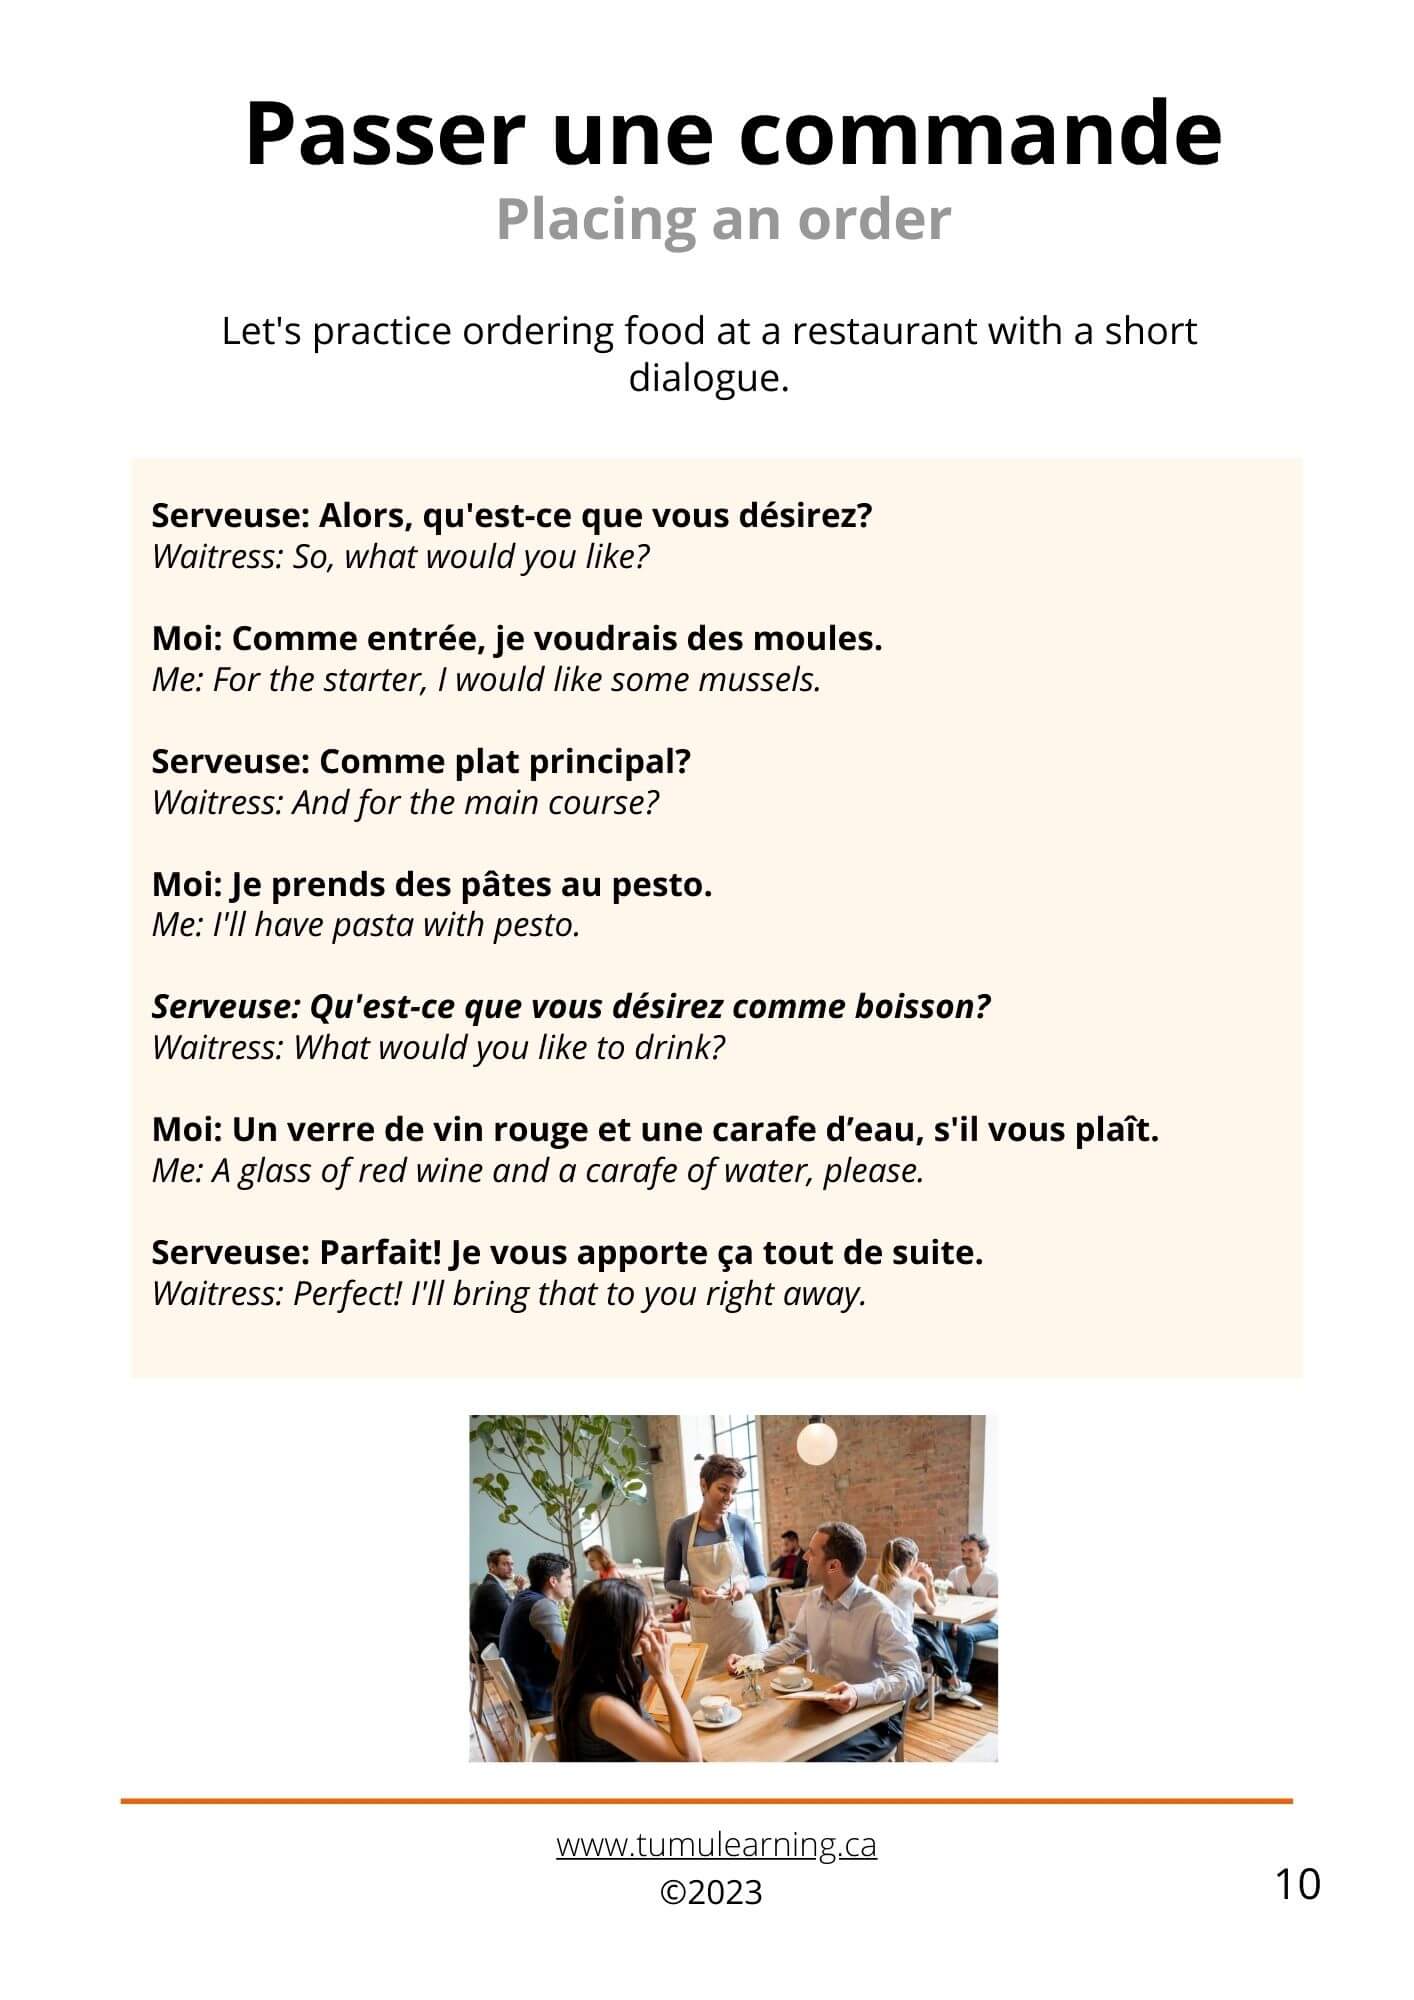 A simple French dialogue to order food at a restaurant